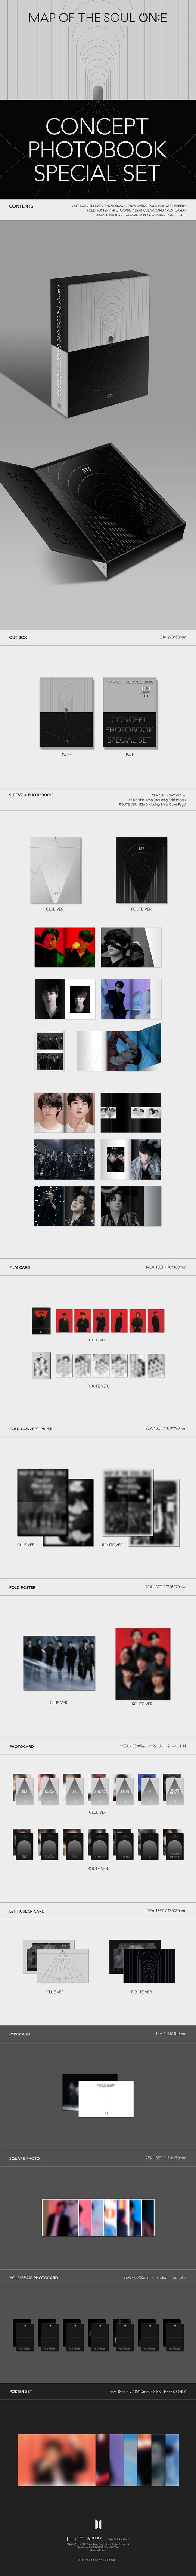 Buy ON:E Concept Photobook - Special Set now!